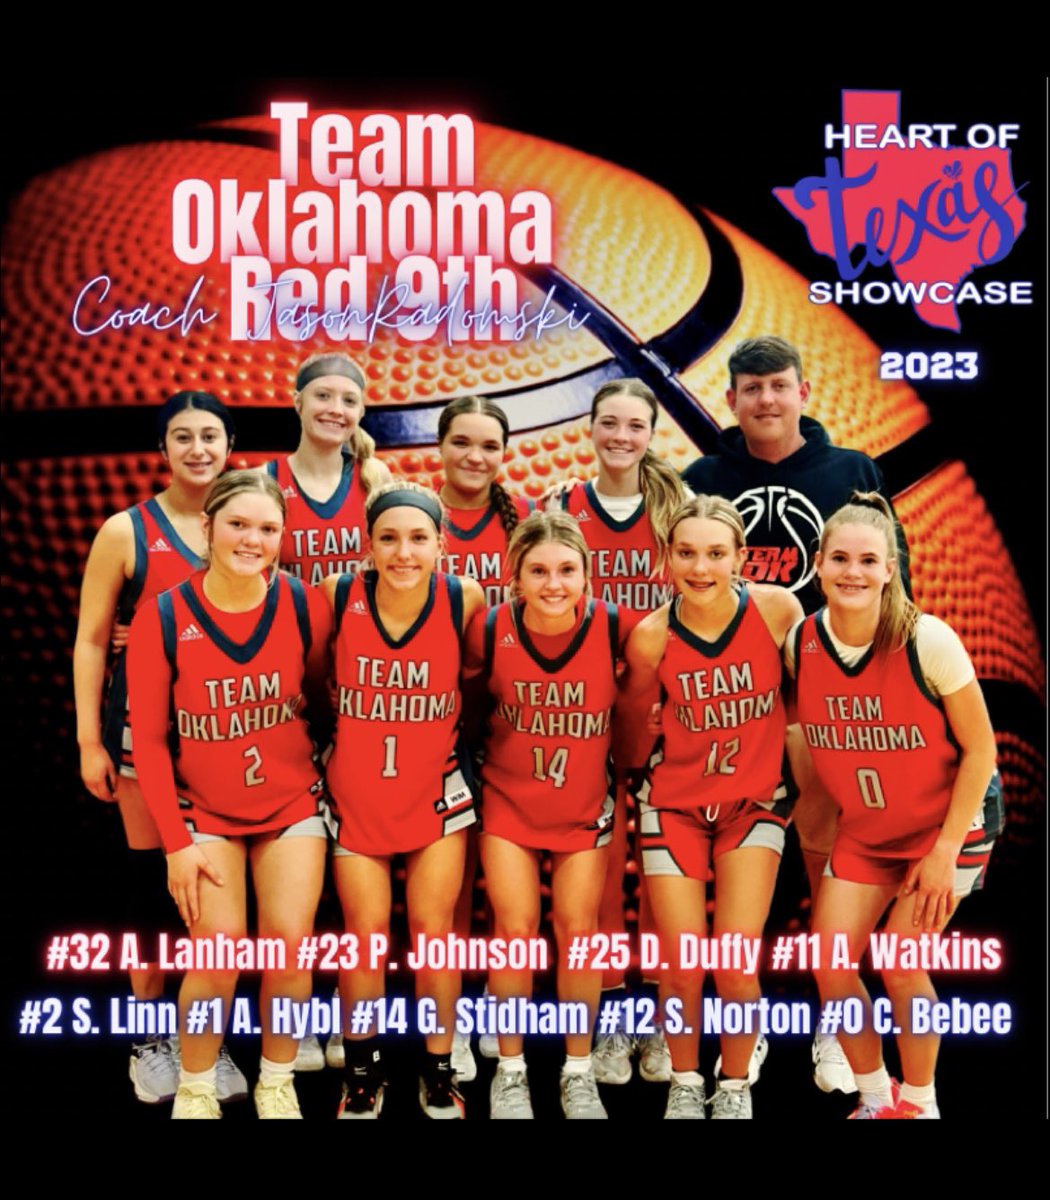 #HeartofTexas did not disappoint. Thankful for great teammates who all want to get to work and a coach who believes in the best of us! 
❤️>
@TeamOKGirlsBB @Radomski14 @PGHCircuit @PGHOklahoma